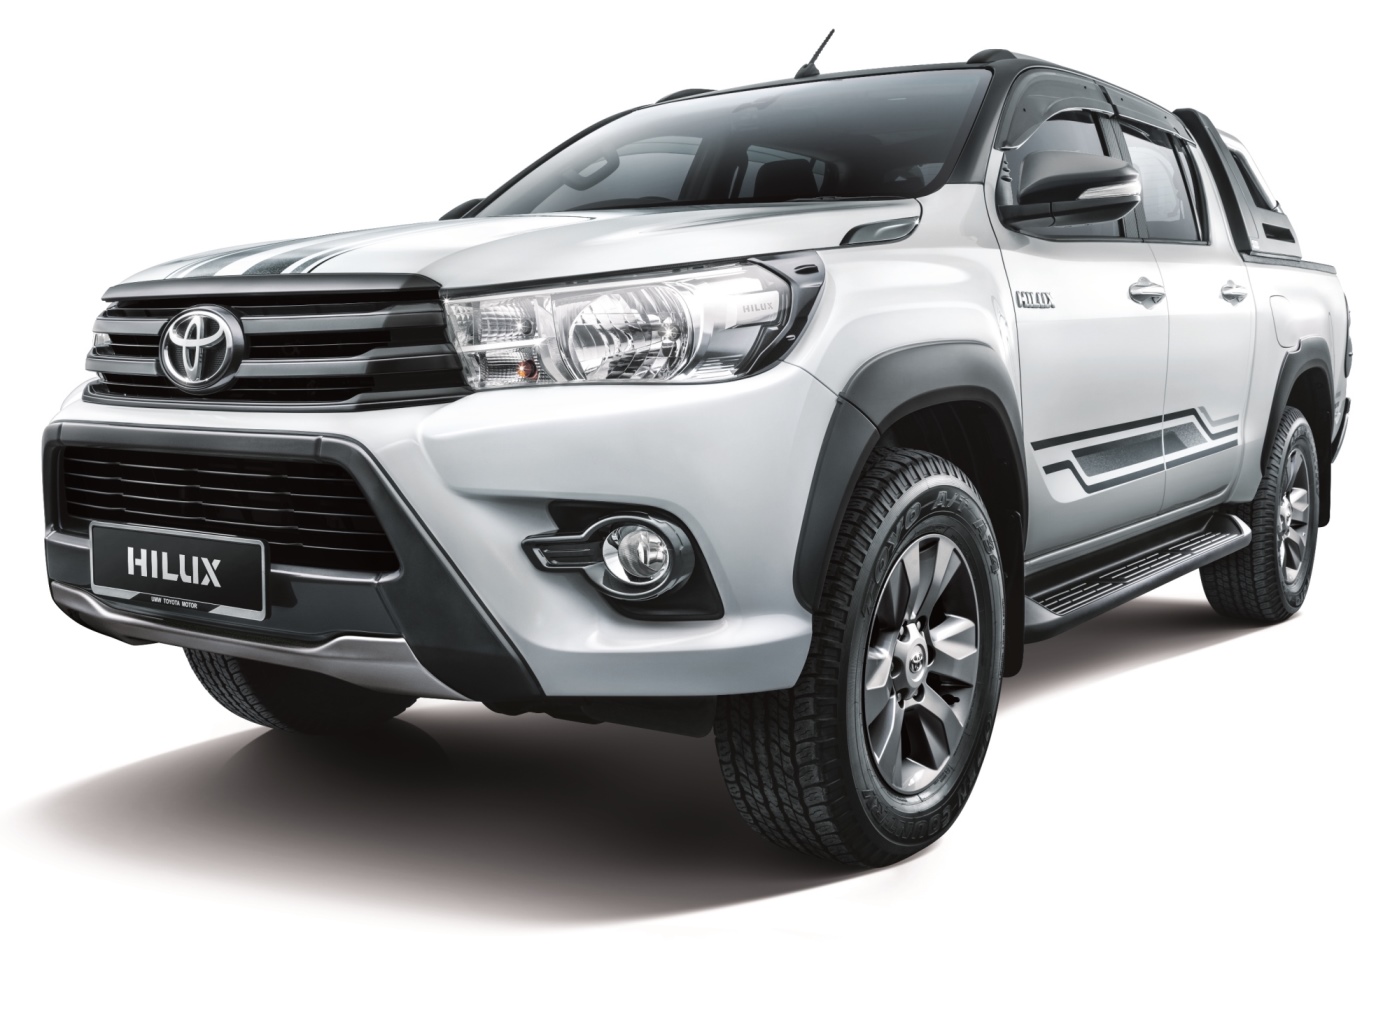 Hilux Limited Edition